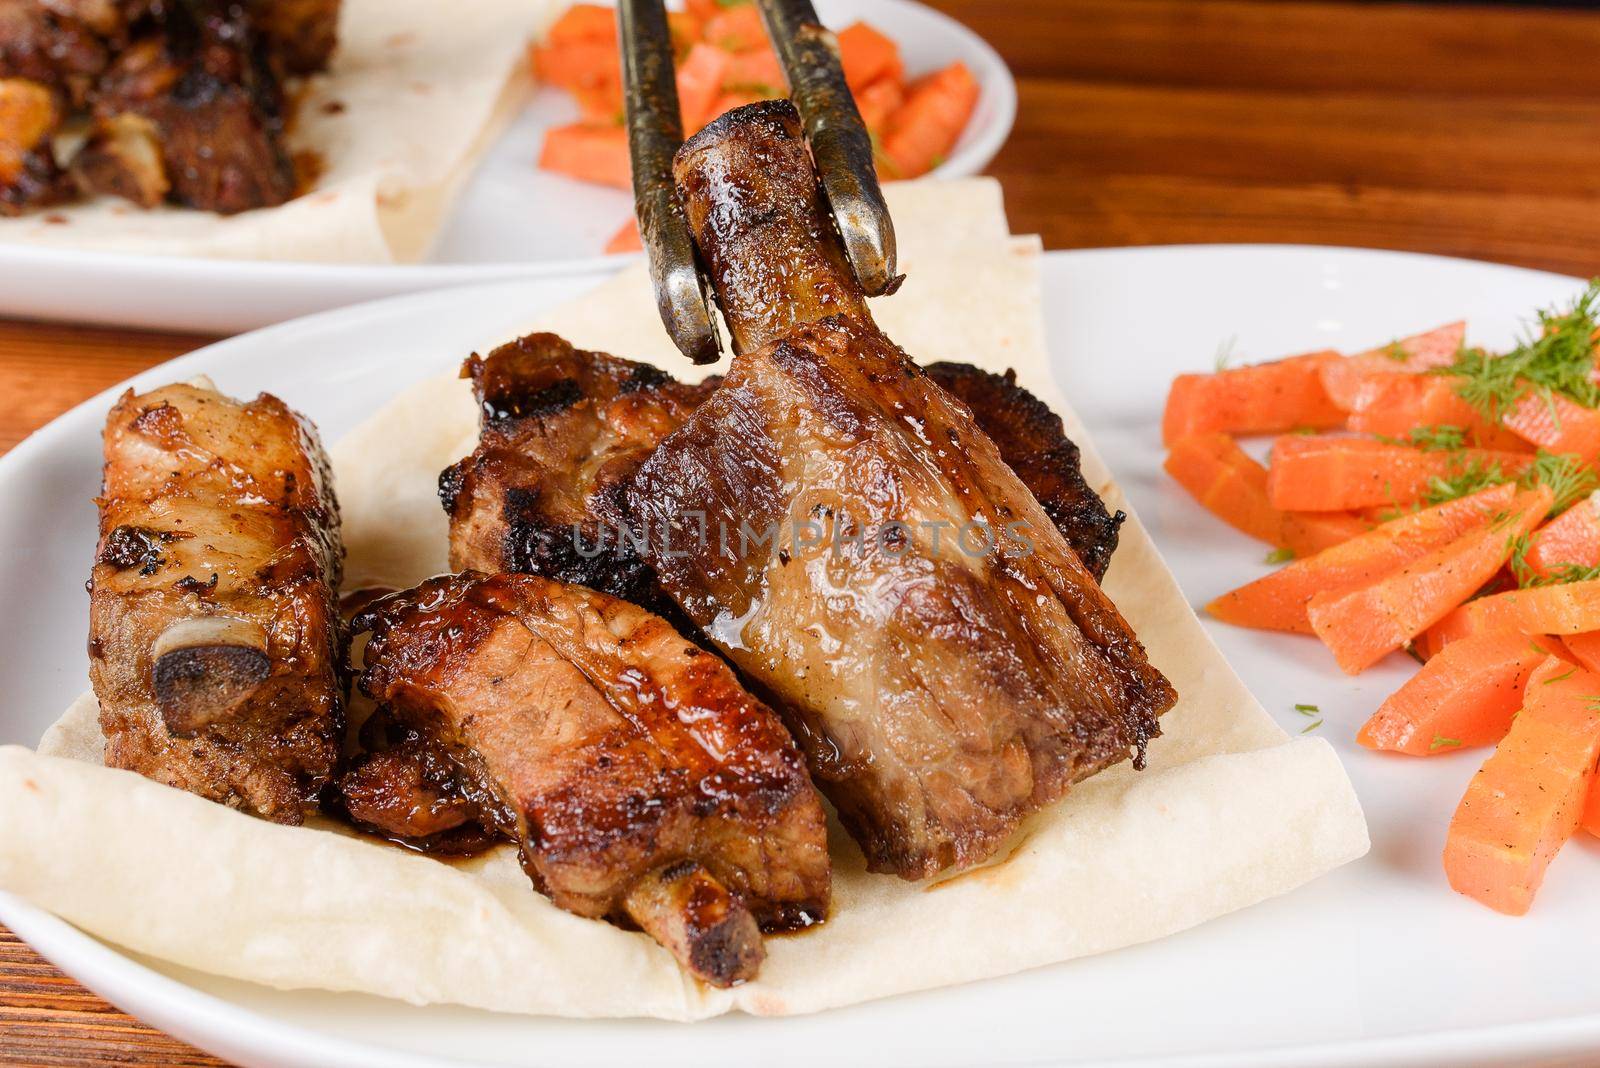 Sliced grilled pork ribs on pita bread with grilled carrots on a white plate on a wooden background.